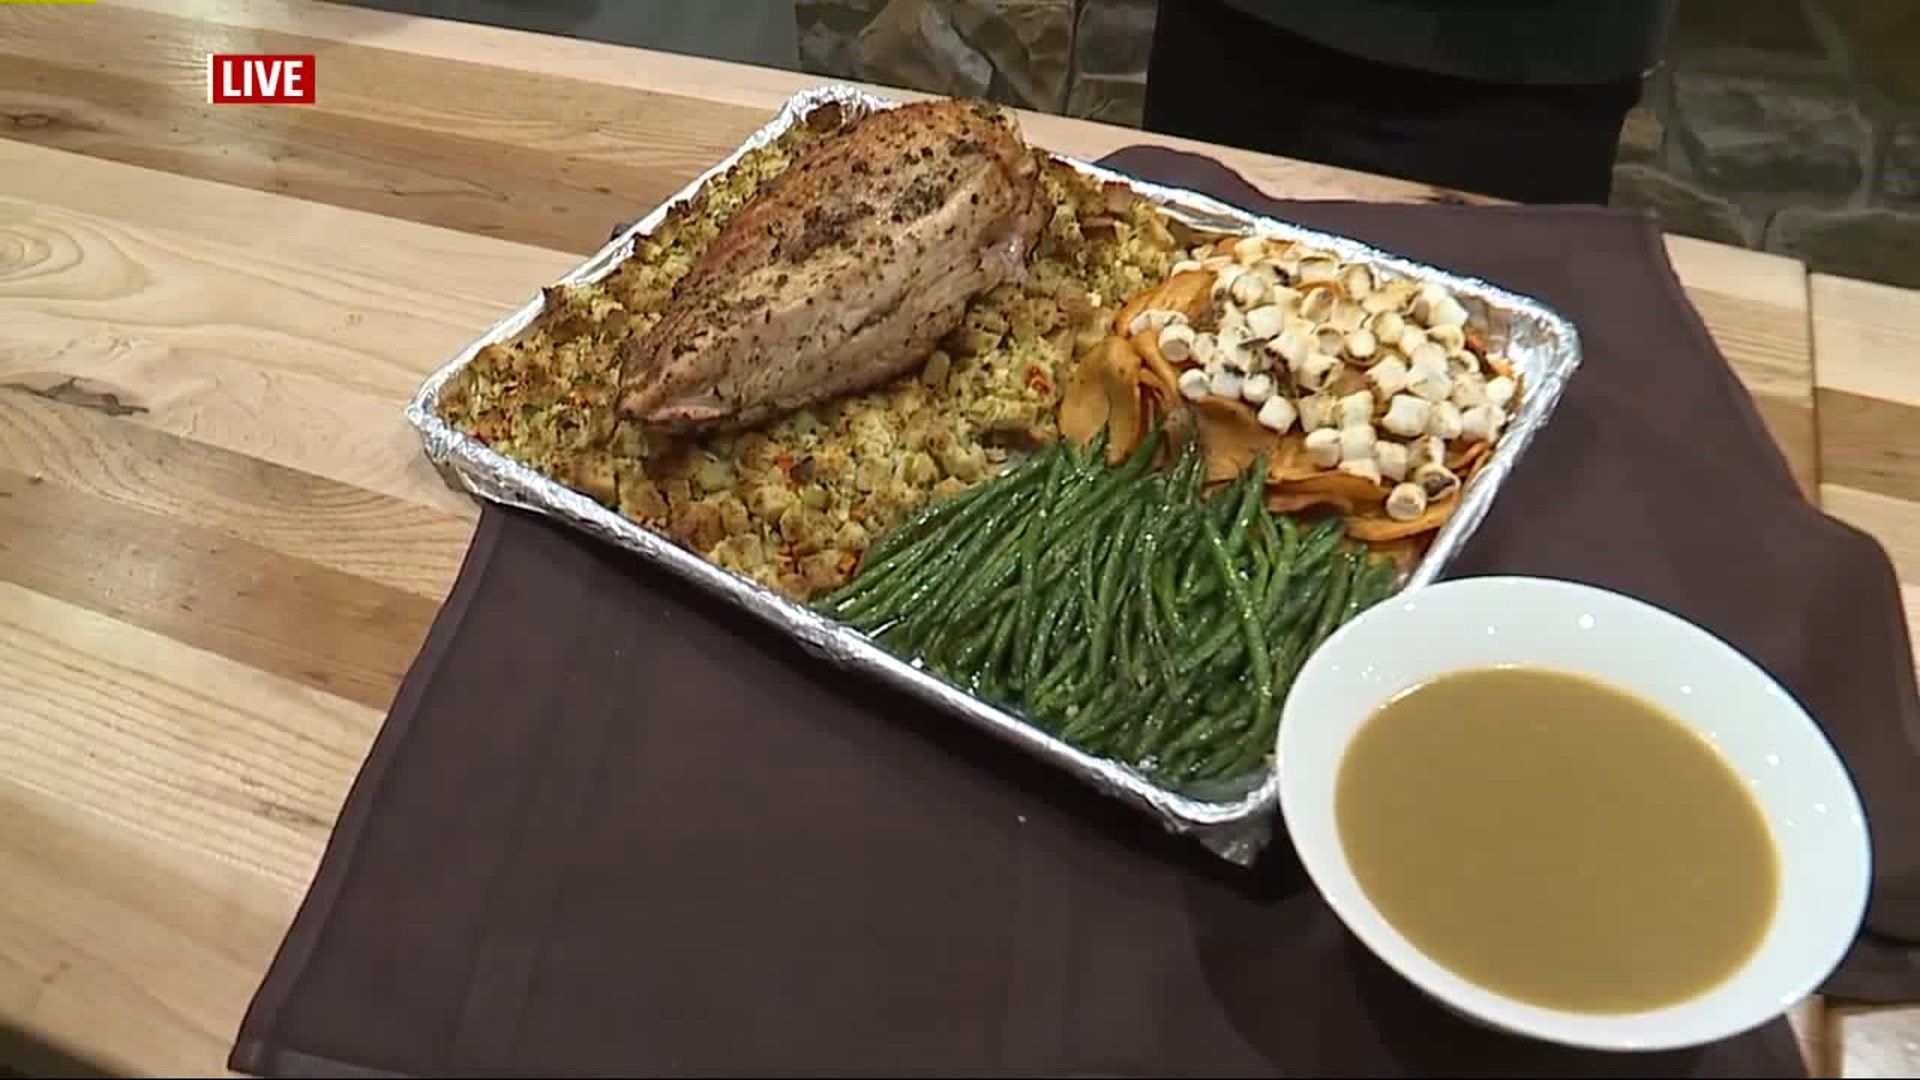 Tips from top chefs in the area for Thanksgiving - we visit with Fire and Grain this morning